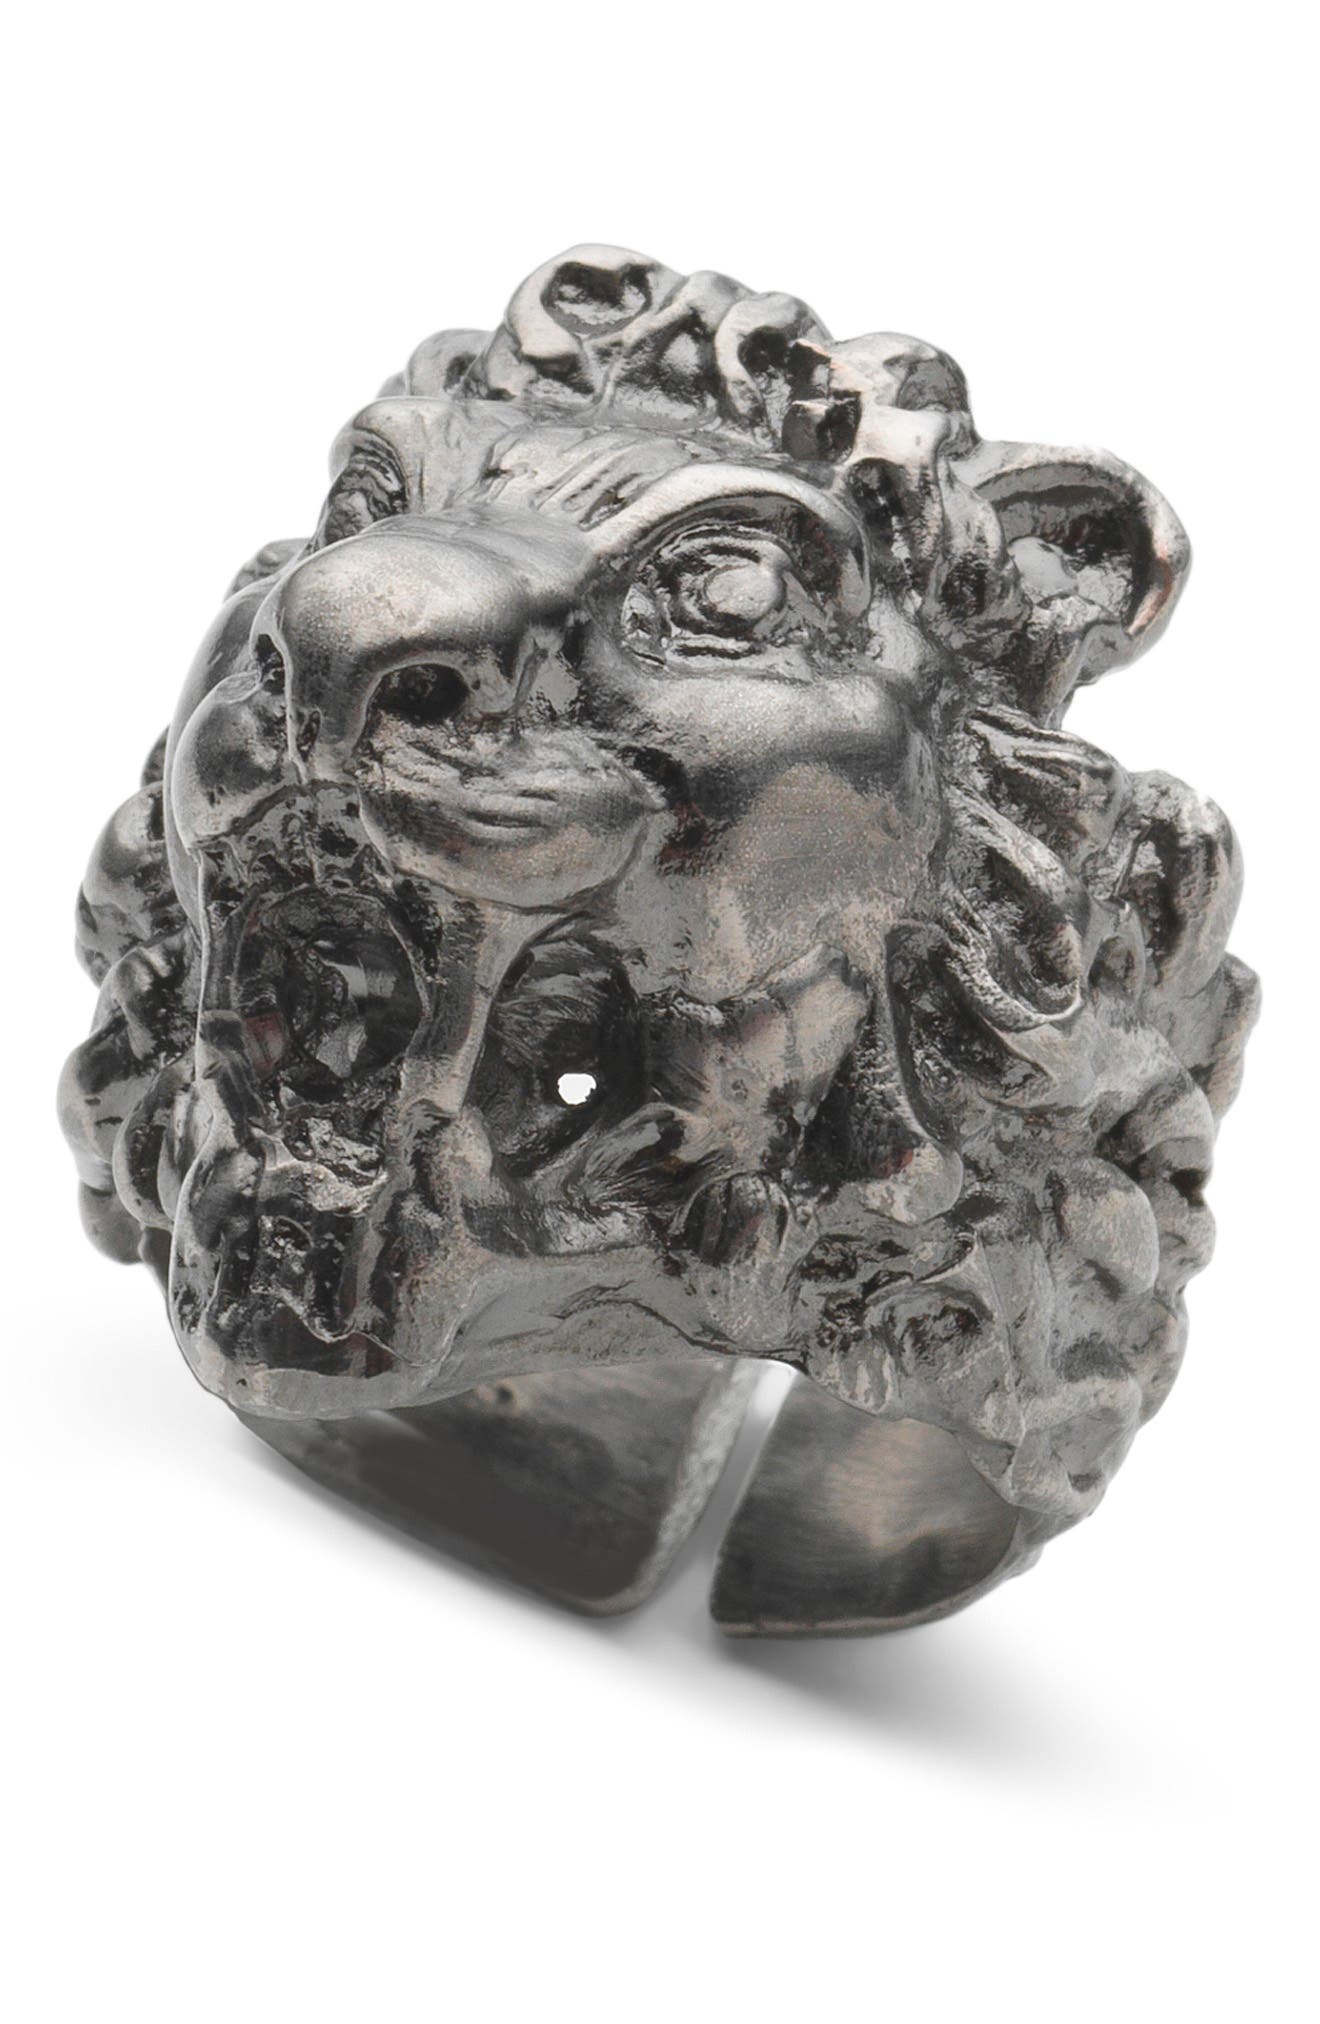 Gucci Fashion Show Lion Head Ring in Silver at Nordstrom, Size 7 Us